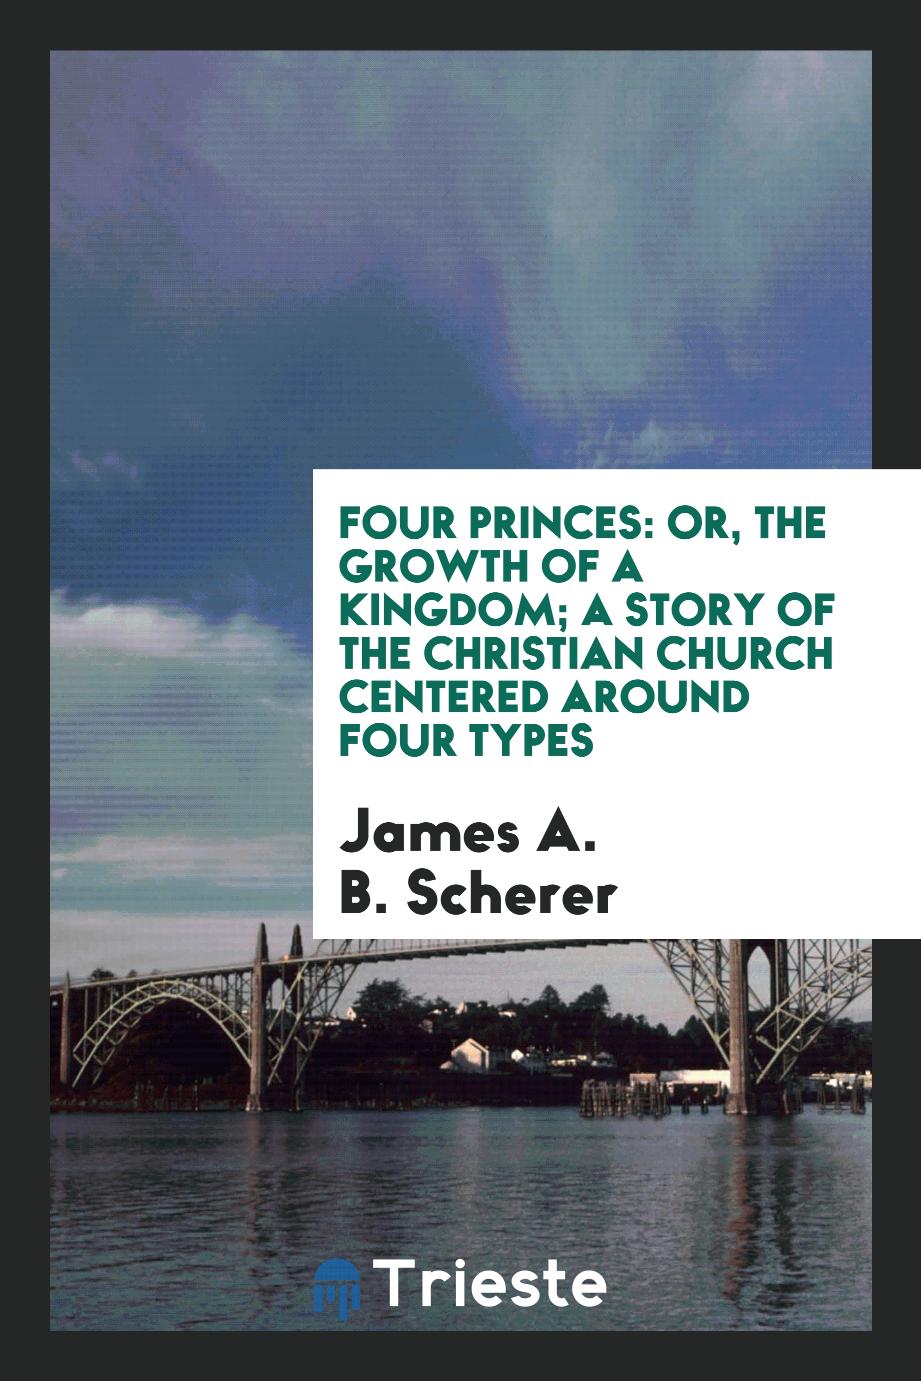 Four Princes: Or, The Growth of a Kingdom; a Story of the Christian Church Centered Around Four Types